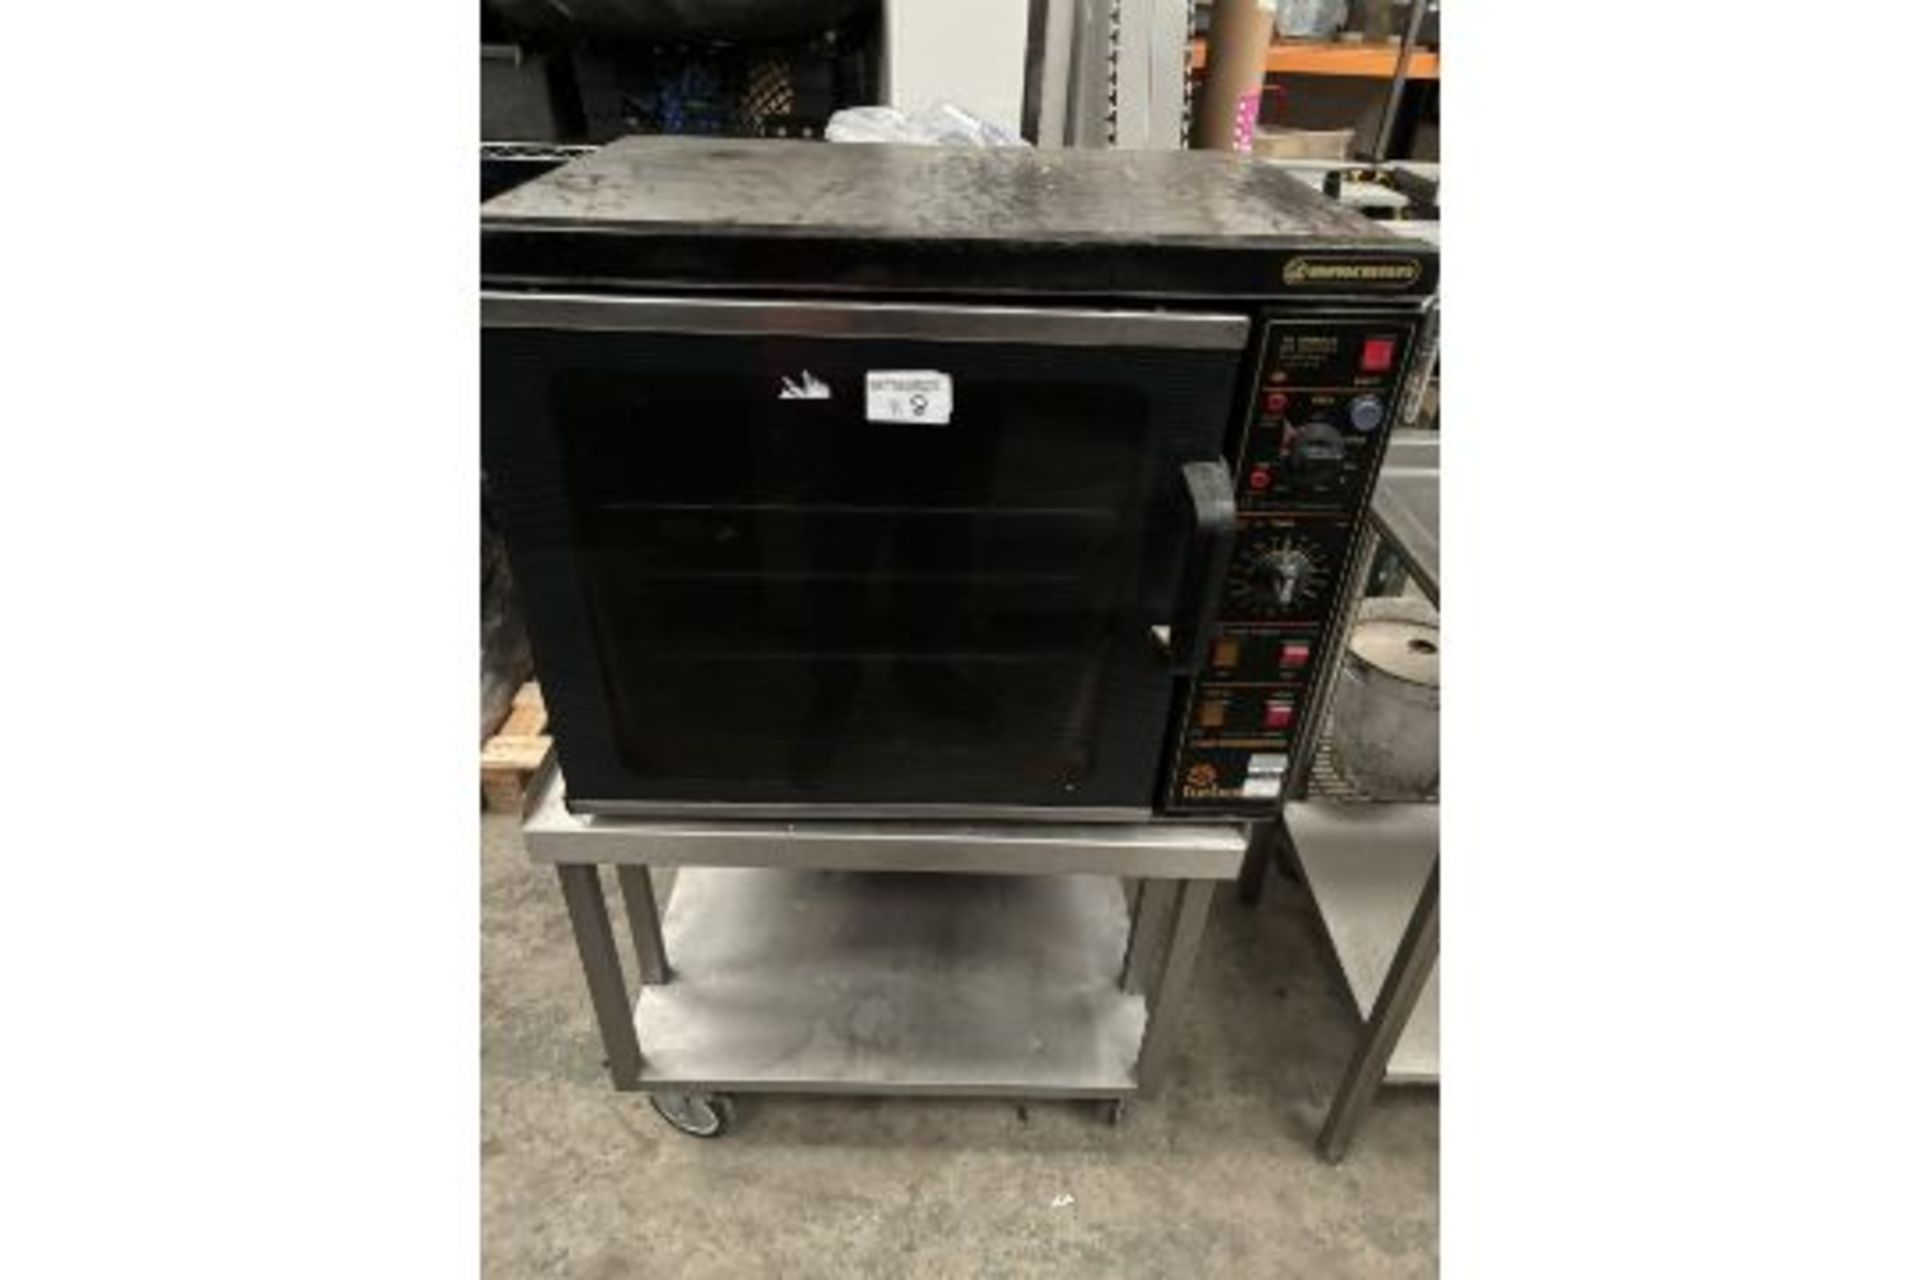 Blue Seal E31 Turbofan Oven Cook and Hold